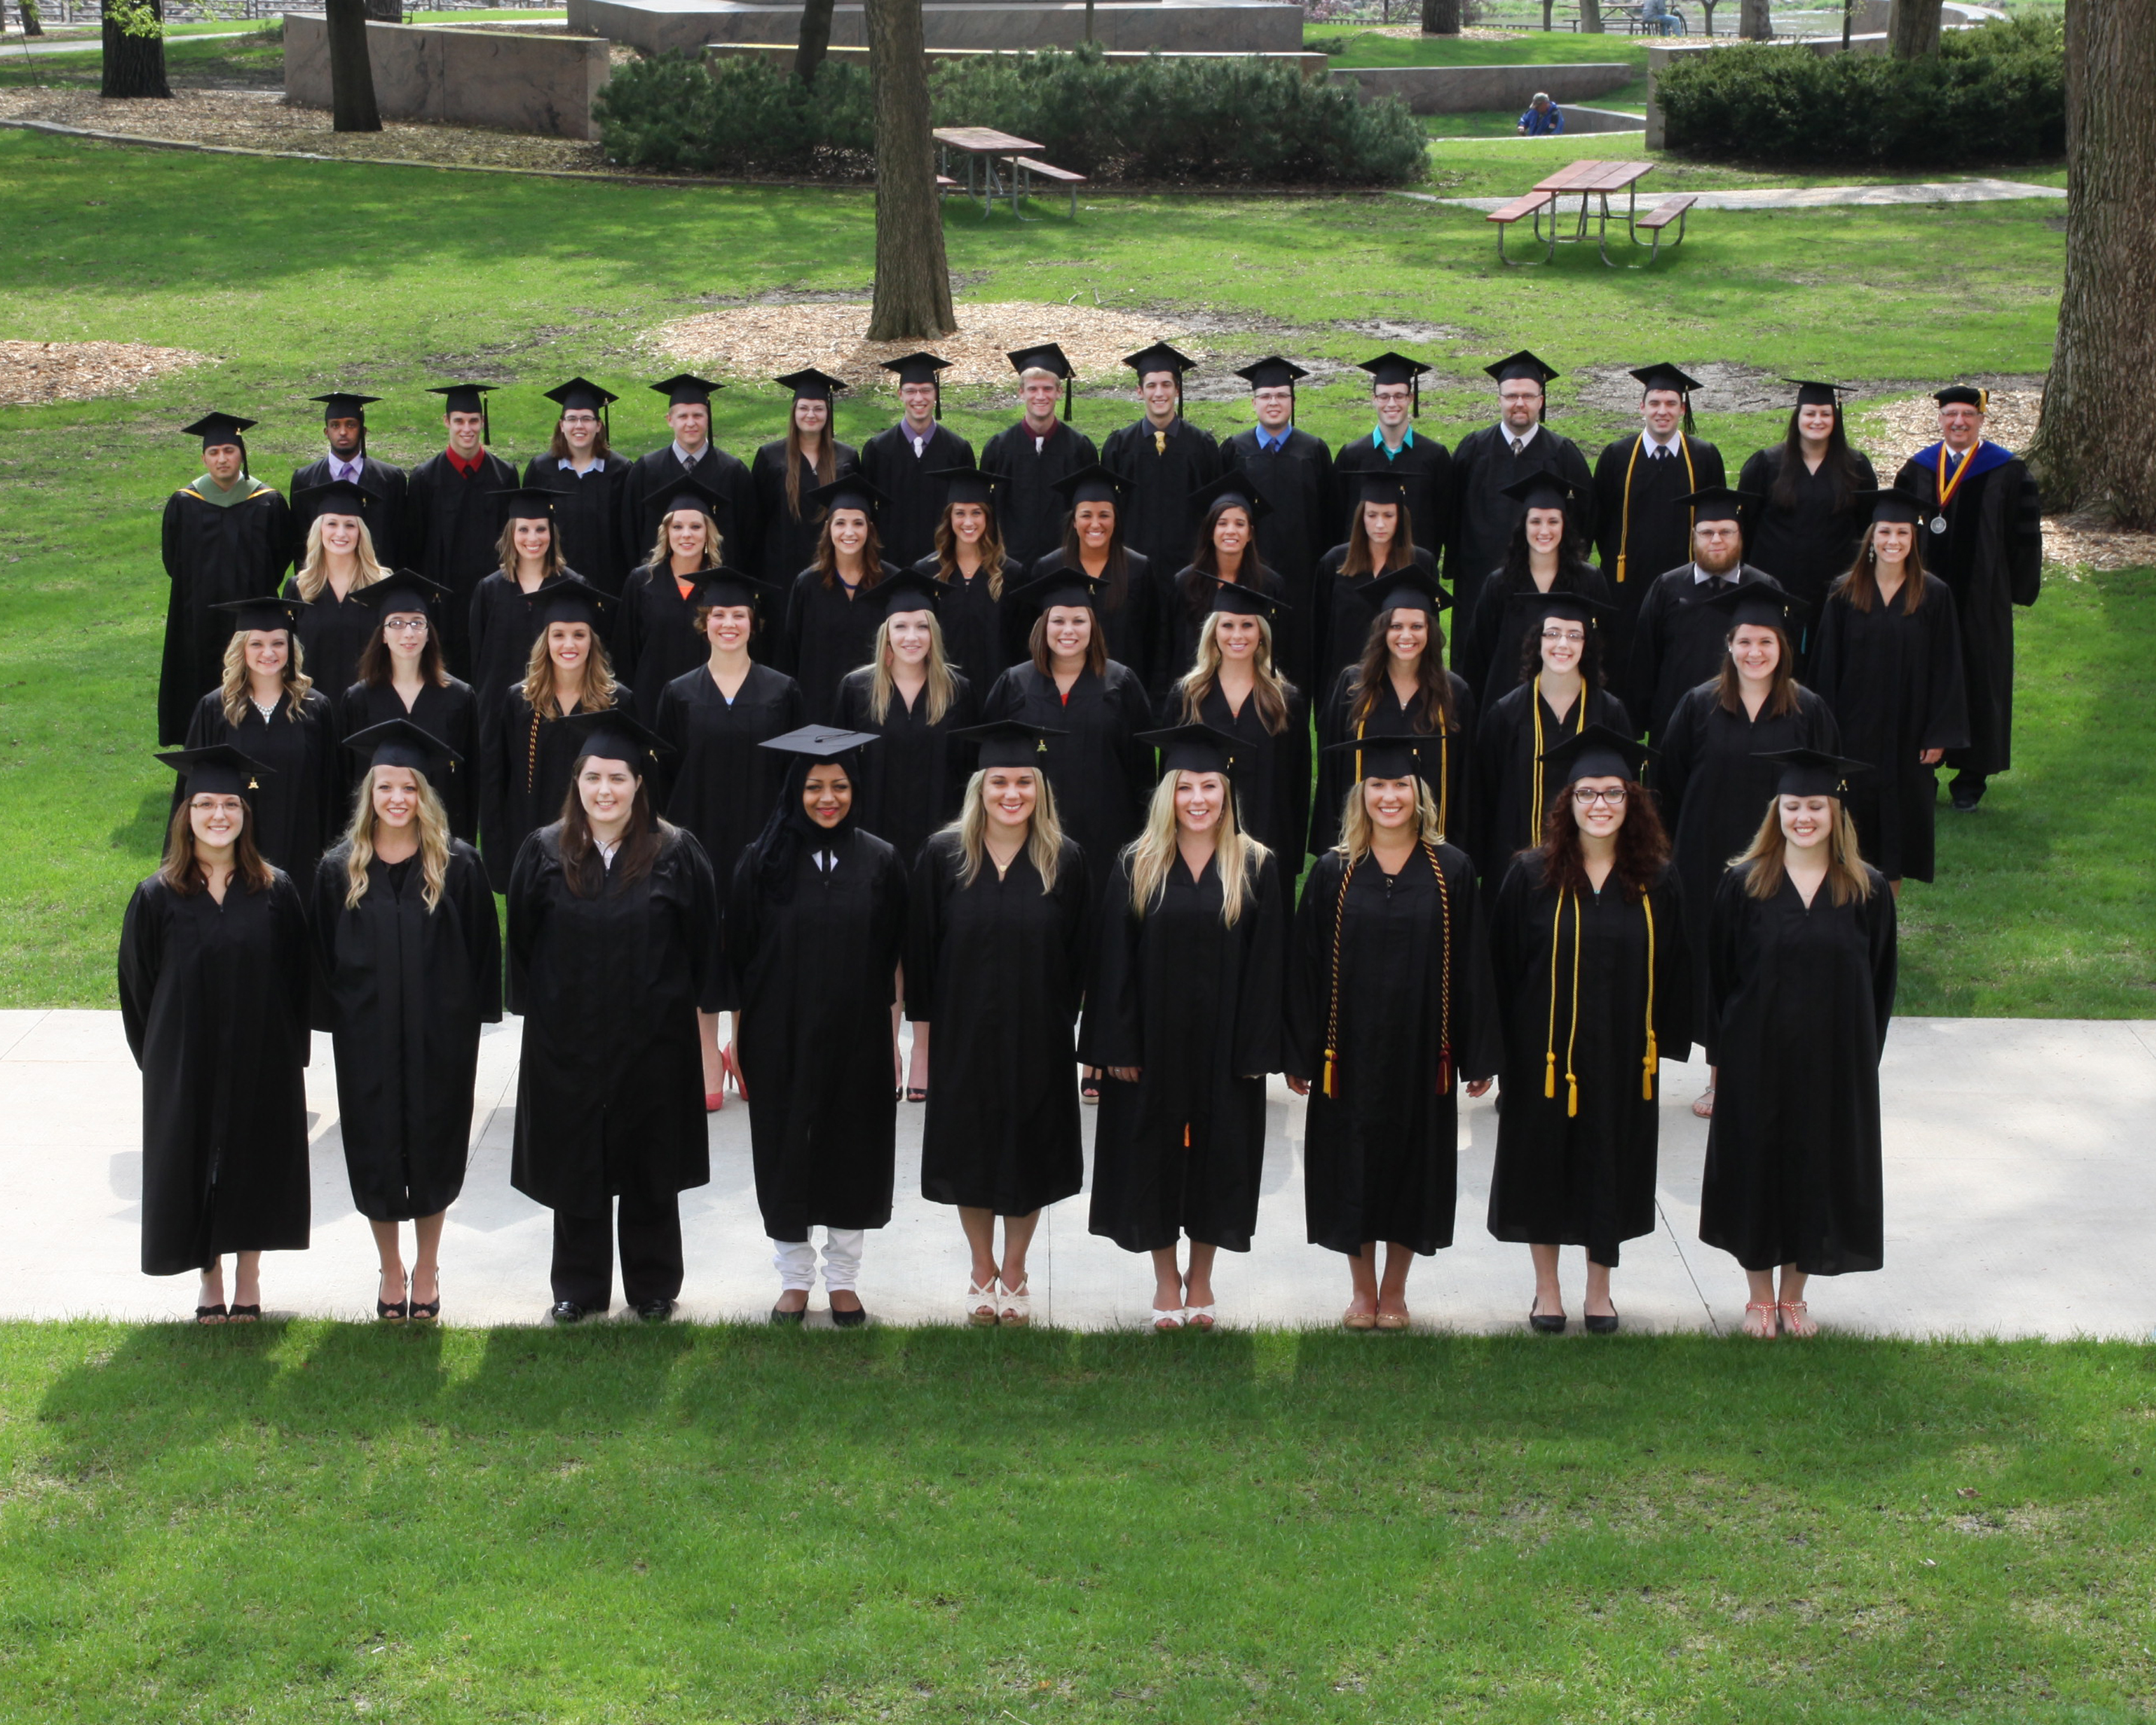 Photo of UMR students in cap and gown.